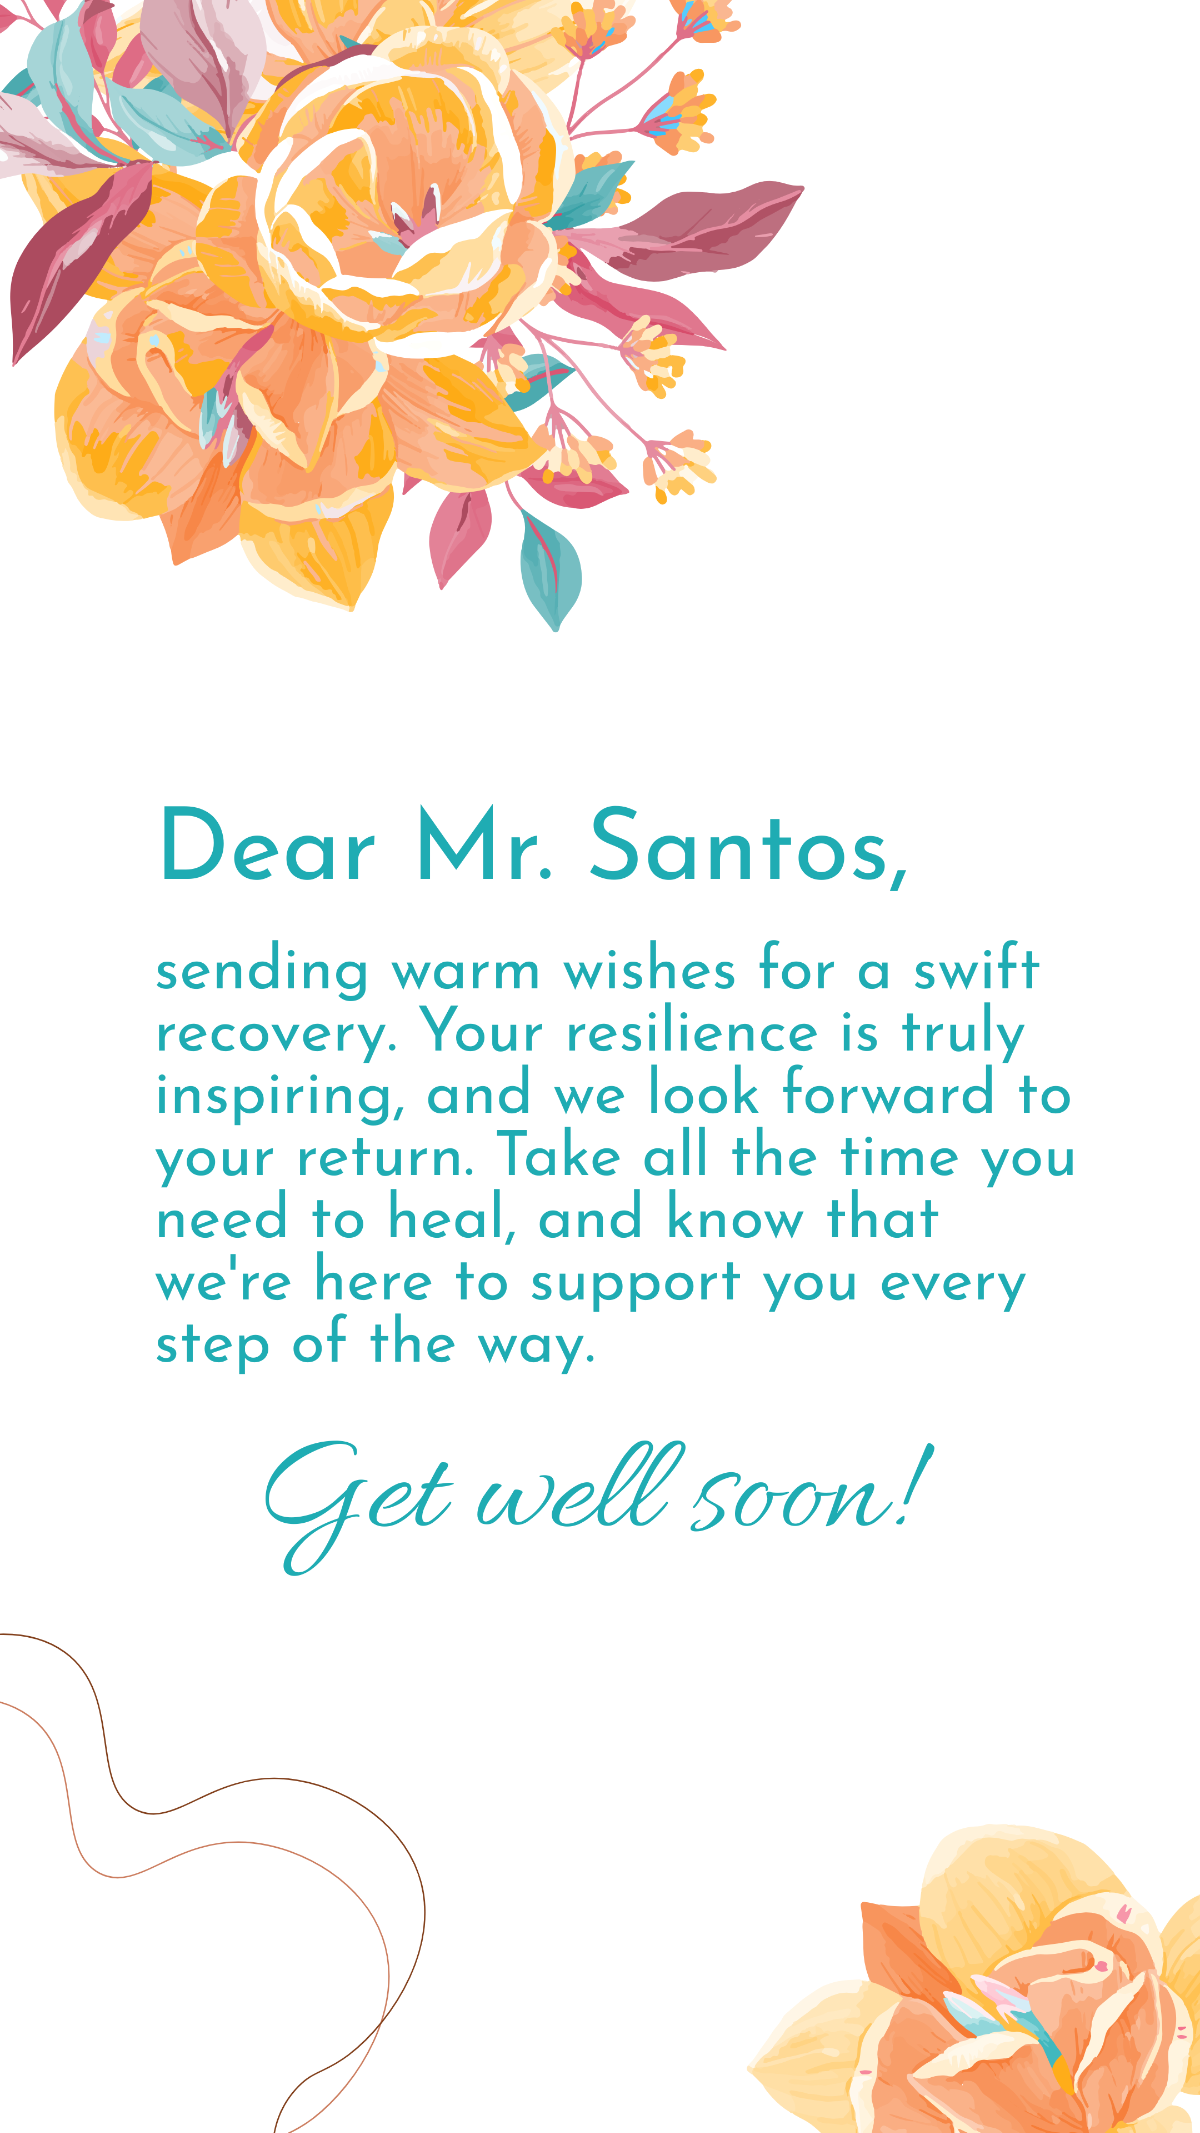 Get Well Soon Wishes For Client